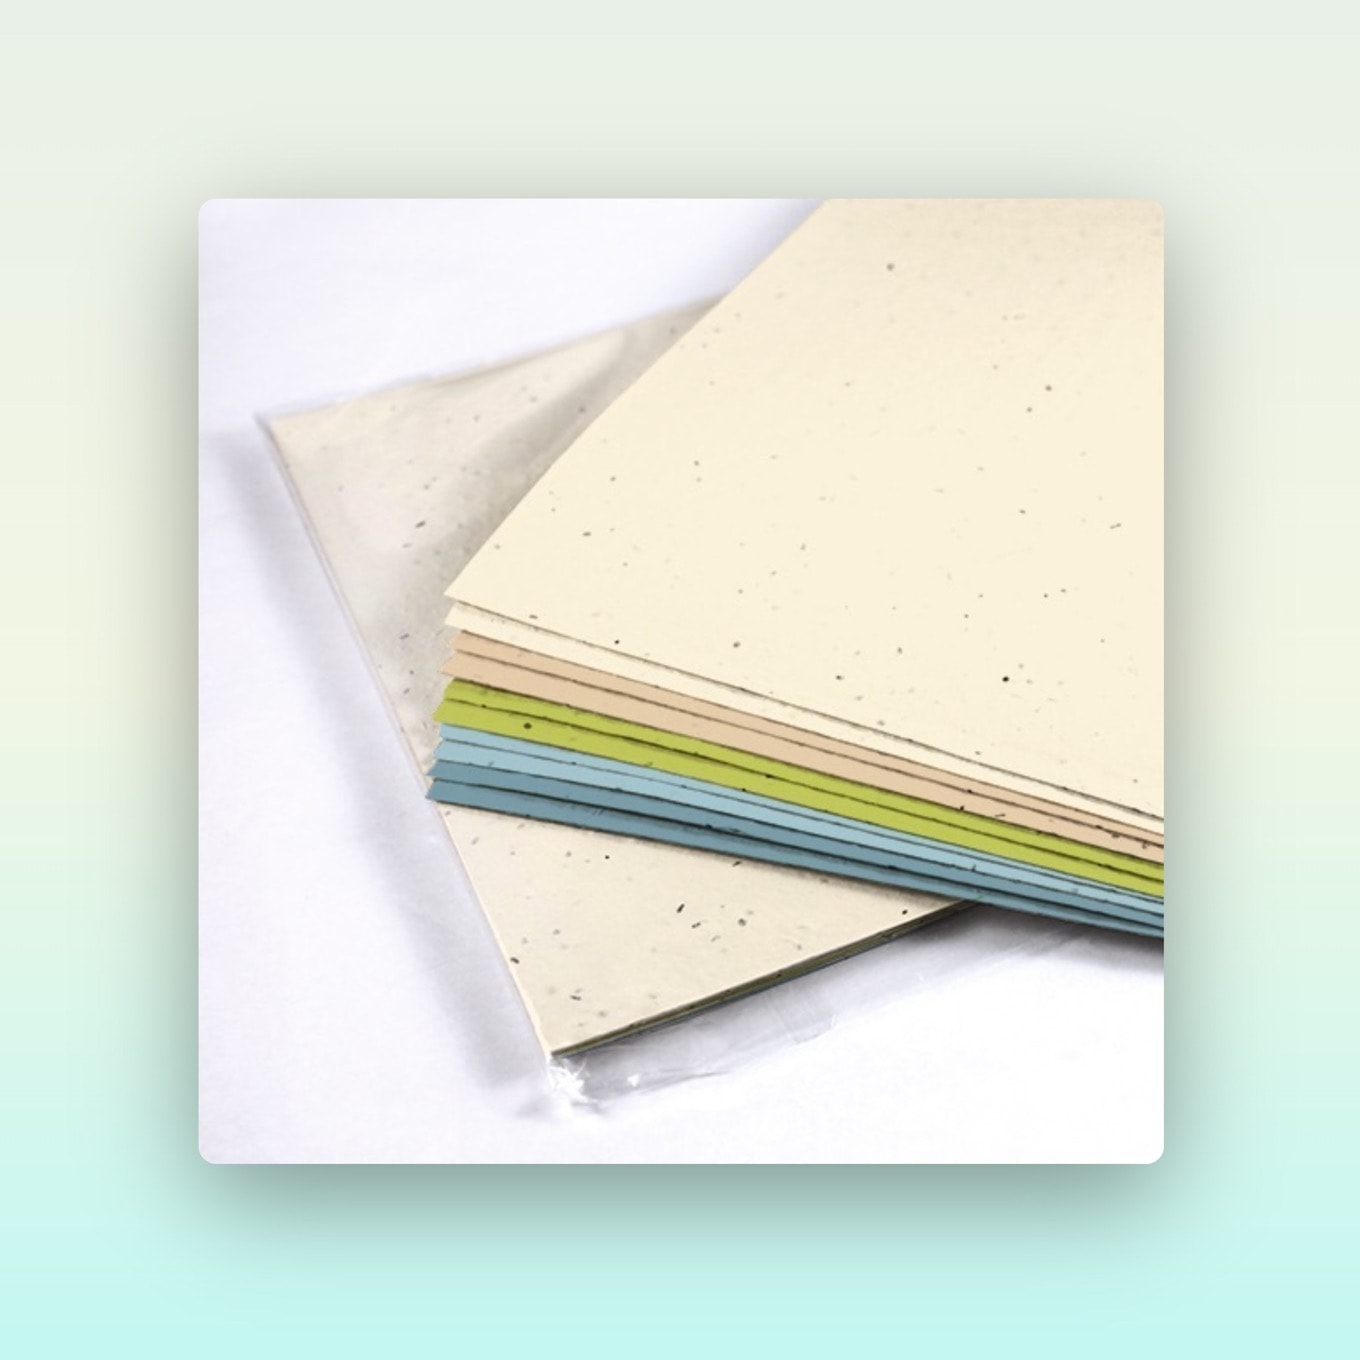 A stack of colorful seed paper from Botanical Paper